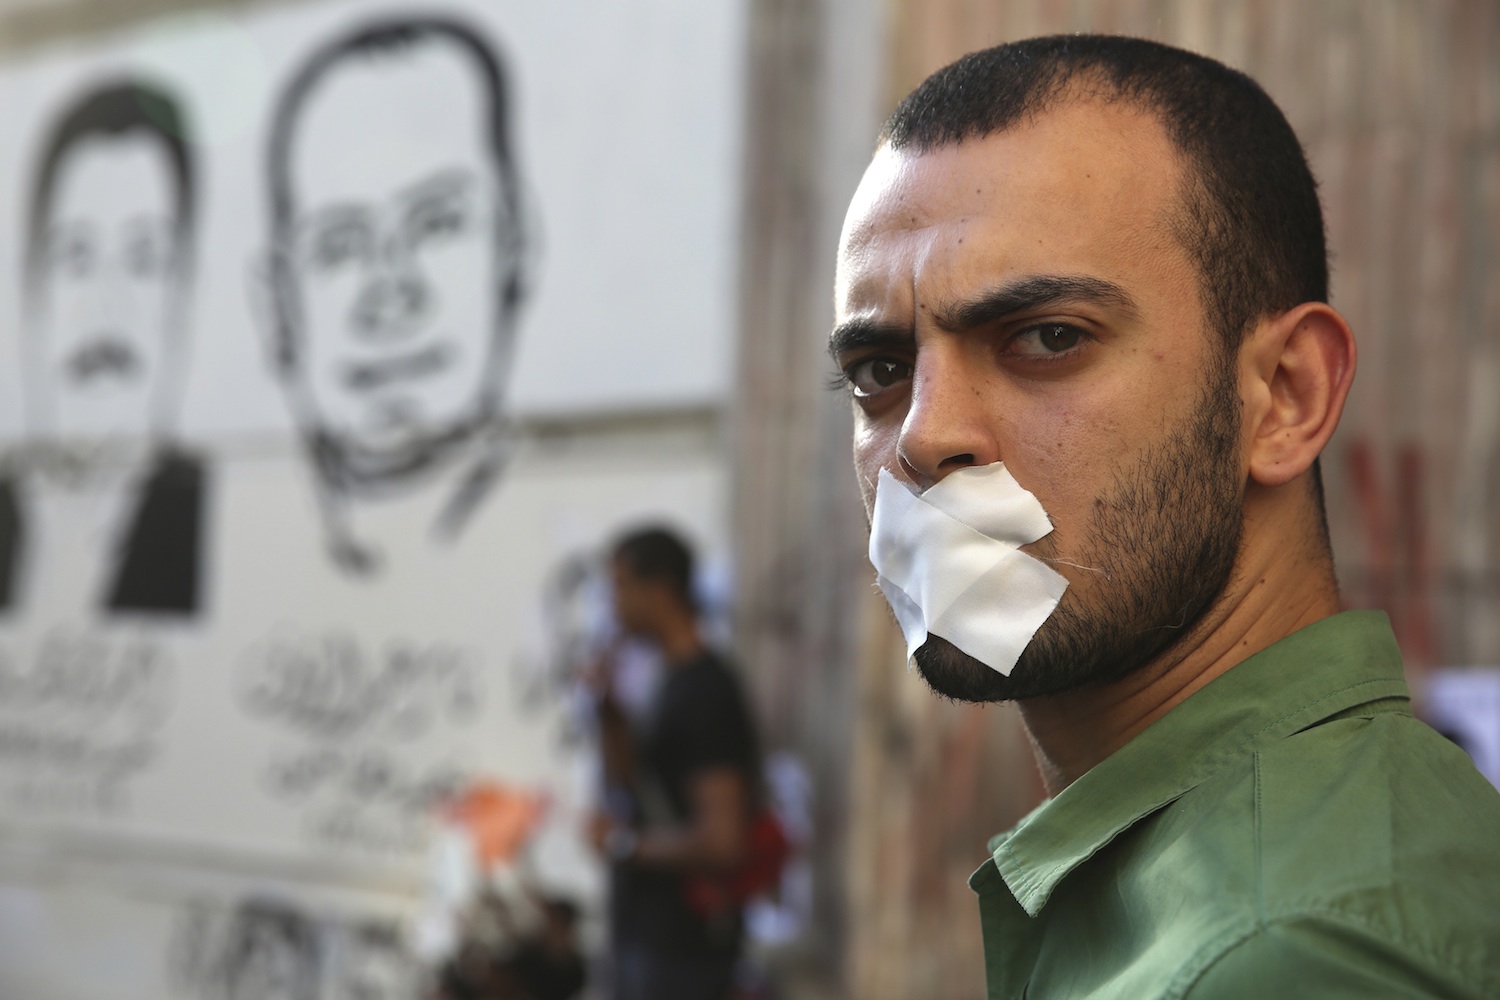 ﻿A protester rallies in support of Al Jazeera journalists Abdullah al-Shami and Mohammed Sultan, who were detained by Egyptian authorities, in front of the Press Syndicate in Cairo. June 1, 2014. (Photo: Reuters/Mohamed Abd El Ghany)